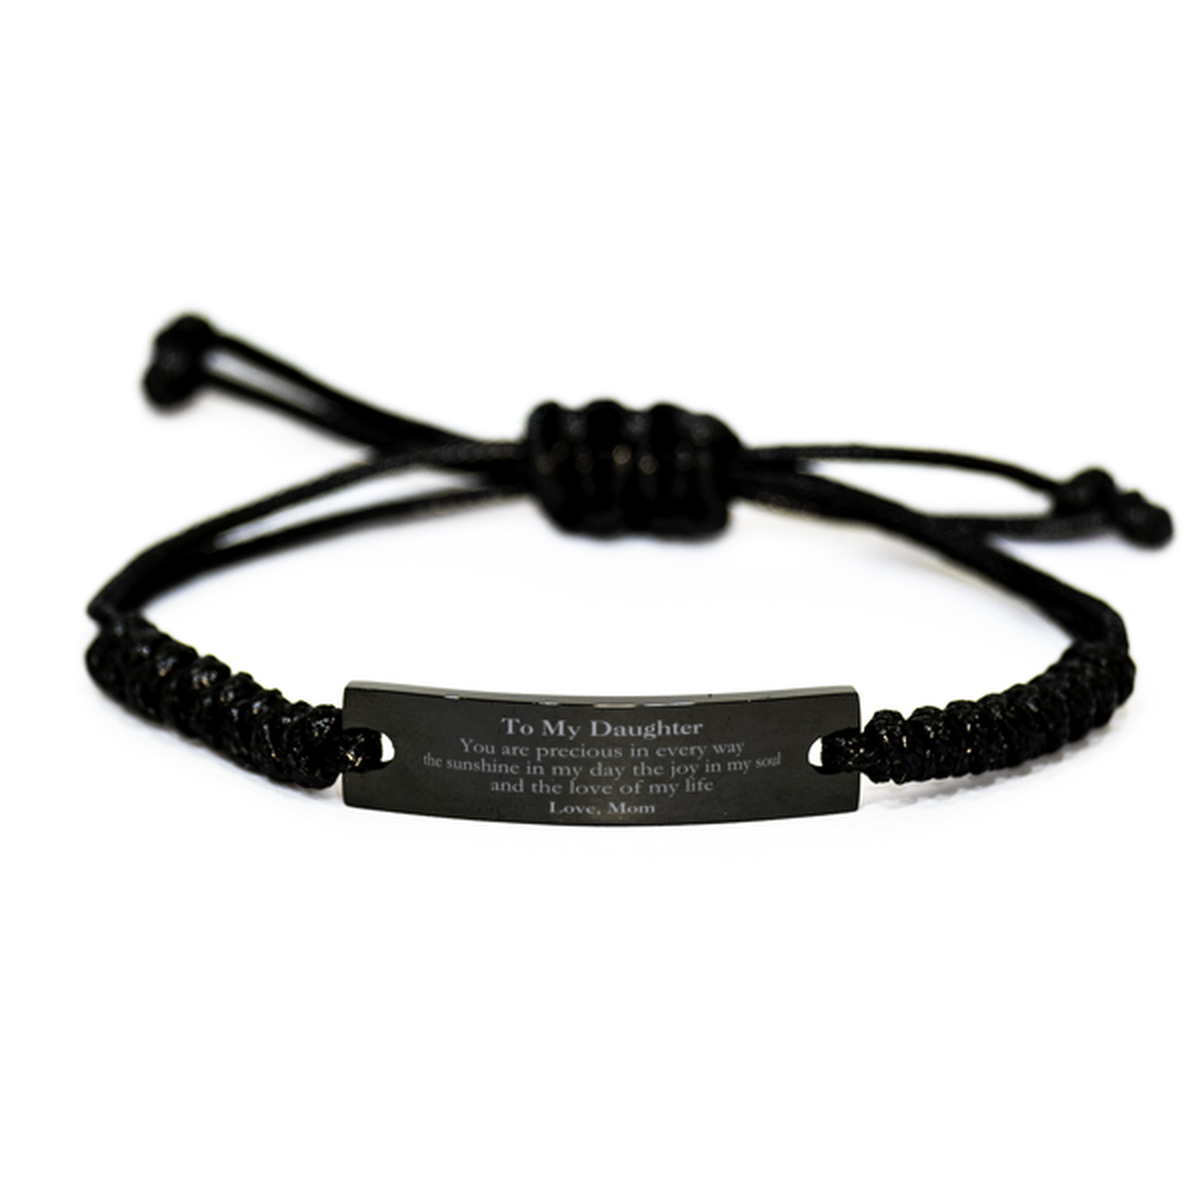 Graduation Gifts for Daughter Black Rope Bracelet Present from Mom, Christmas Daughter Birthday Gifts Daughter You are precious in every way the sunshine in my day. Love, Mom